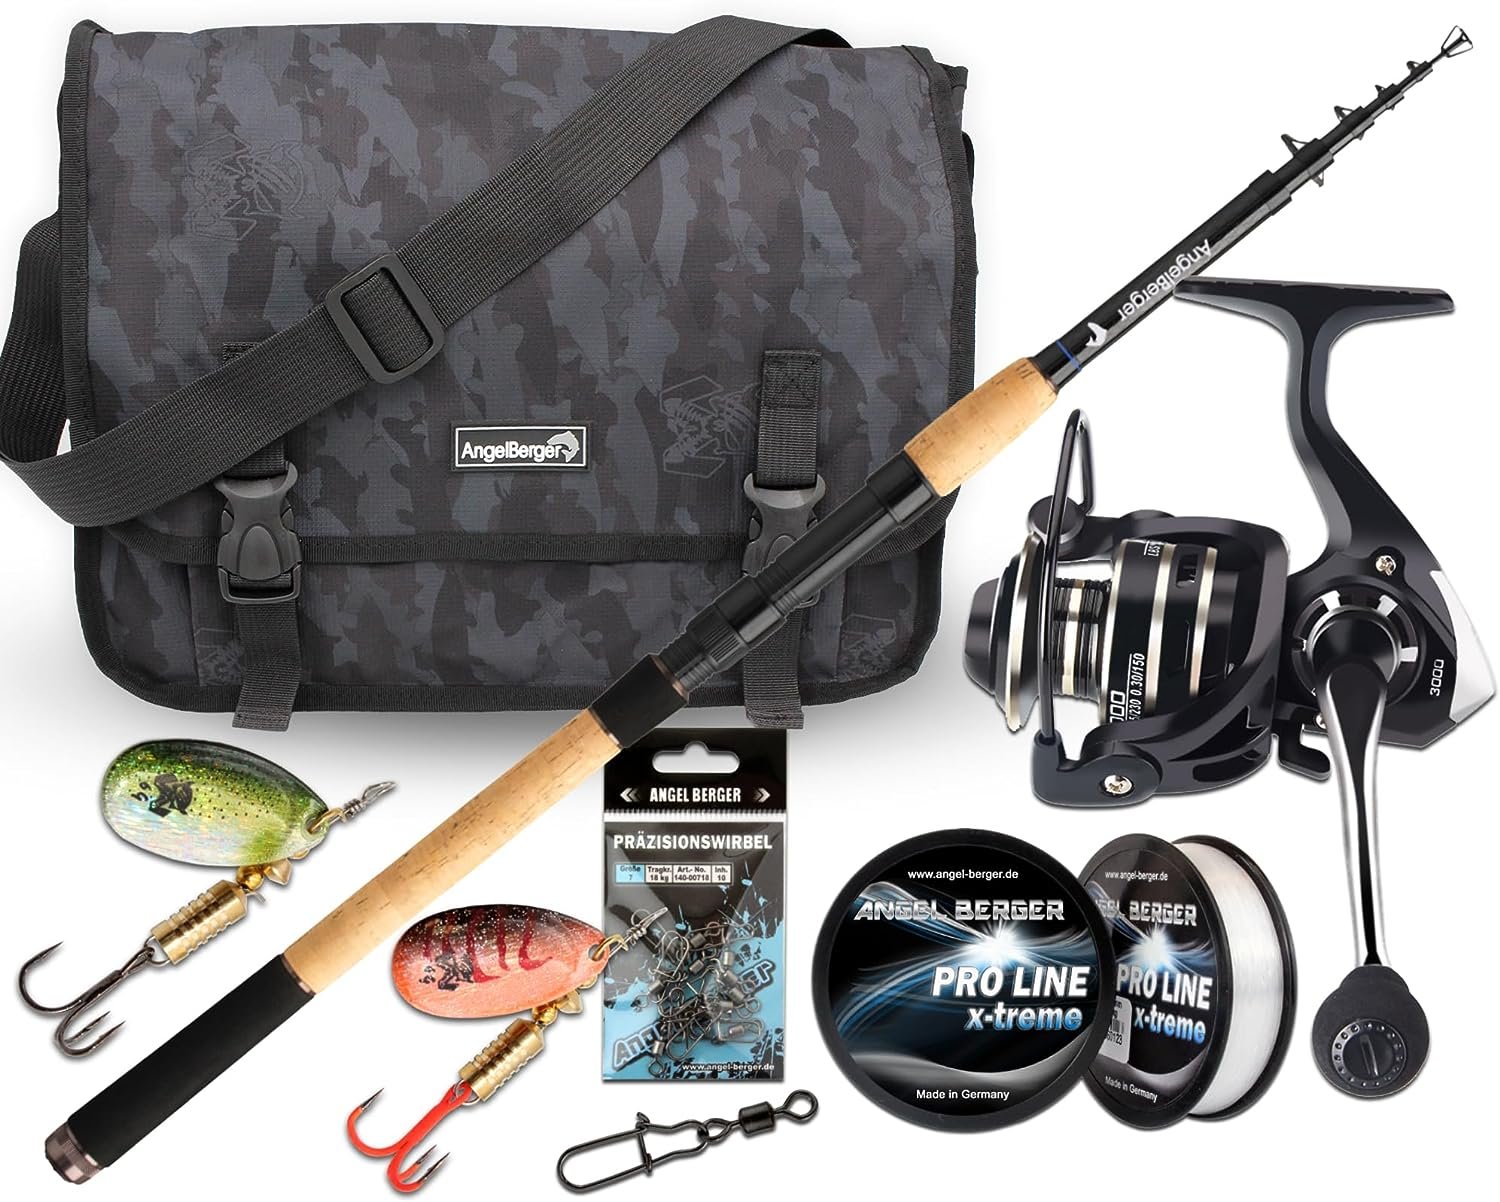 BNTTEAM Portable Fishing Spinning Rod and Reel Combo set Carbon